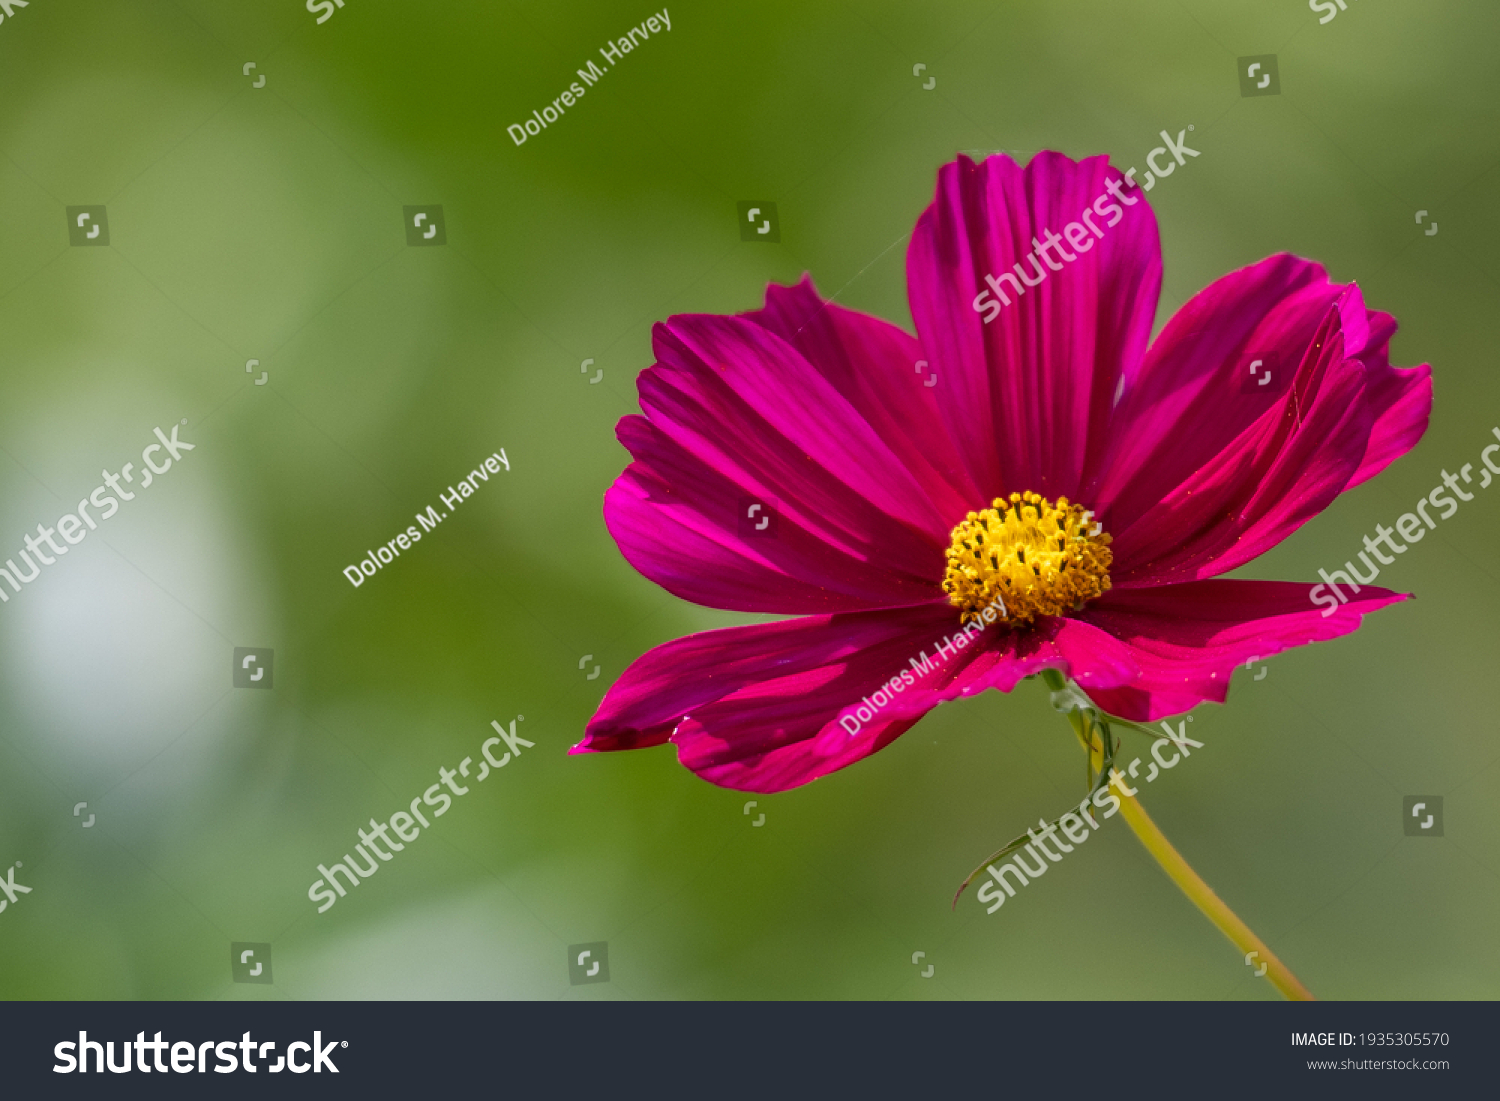 A flower garden with bright pink cosmos flowers, they have long dainty petals, the centers are yellow with dark pink. The plants are on long tall stems. The background is of various green shades. #1935305570